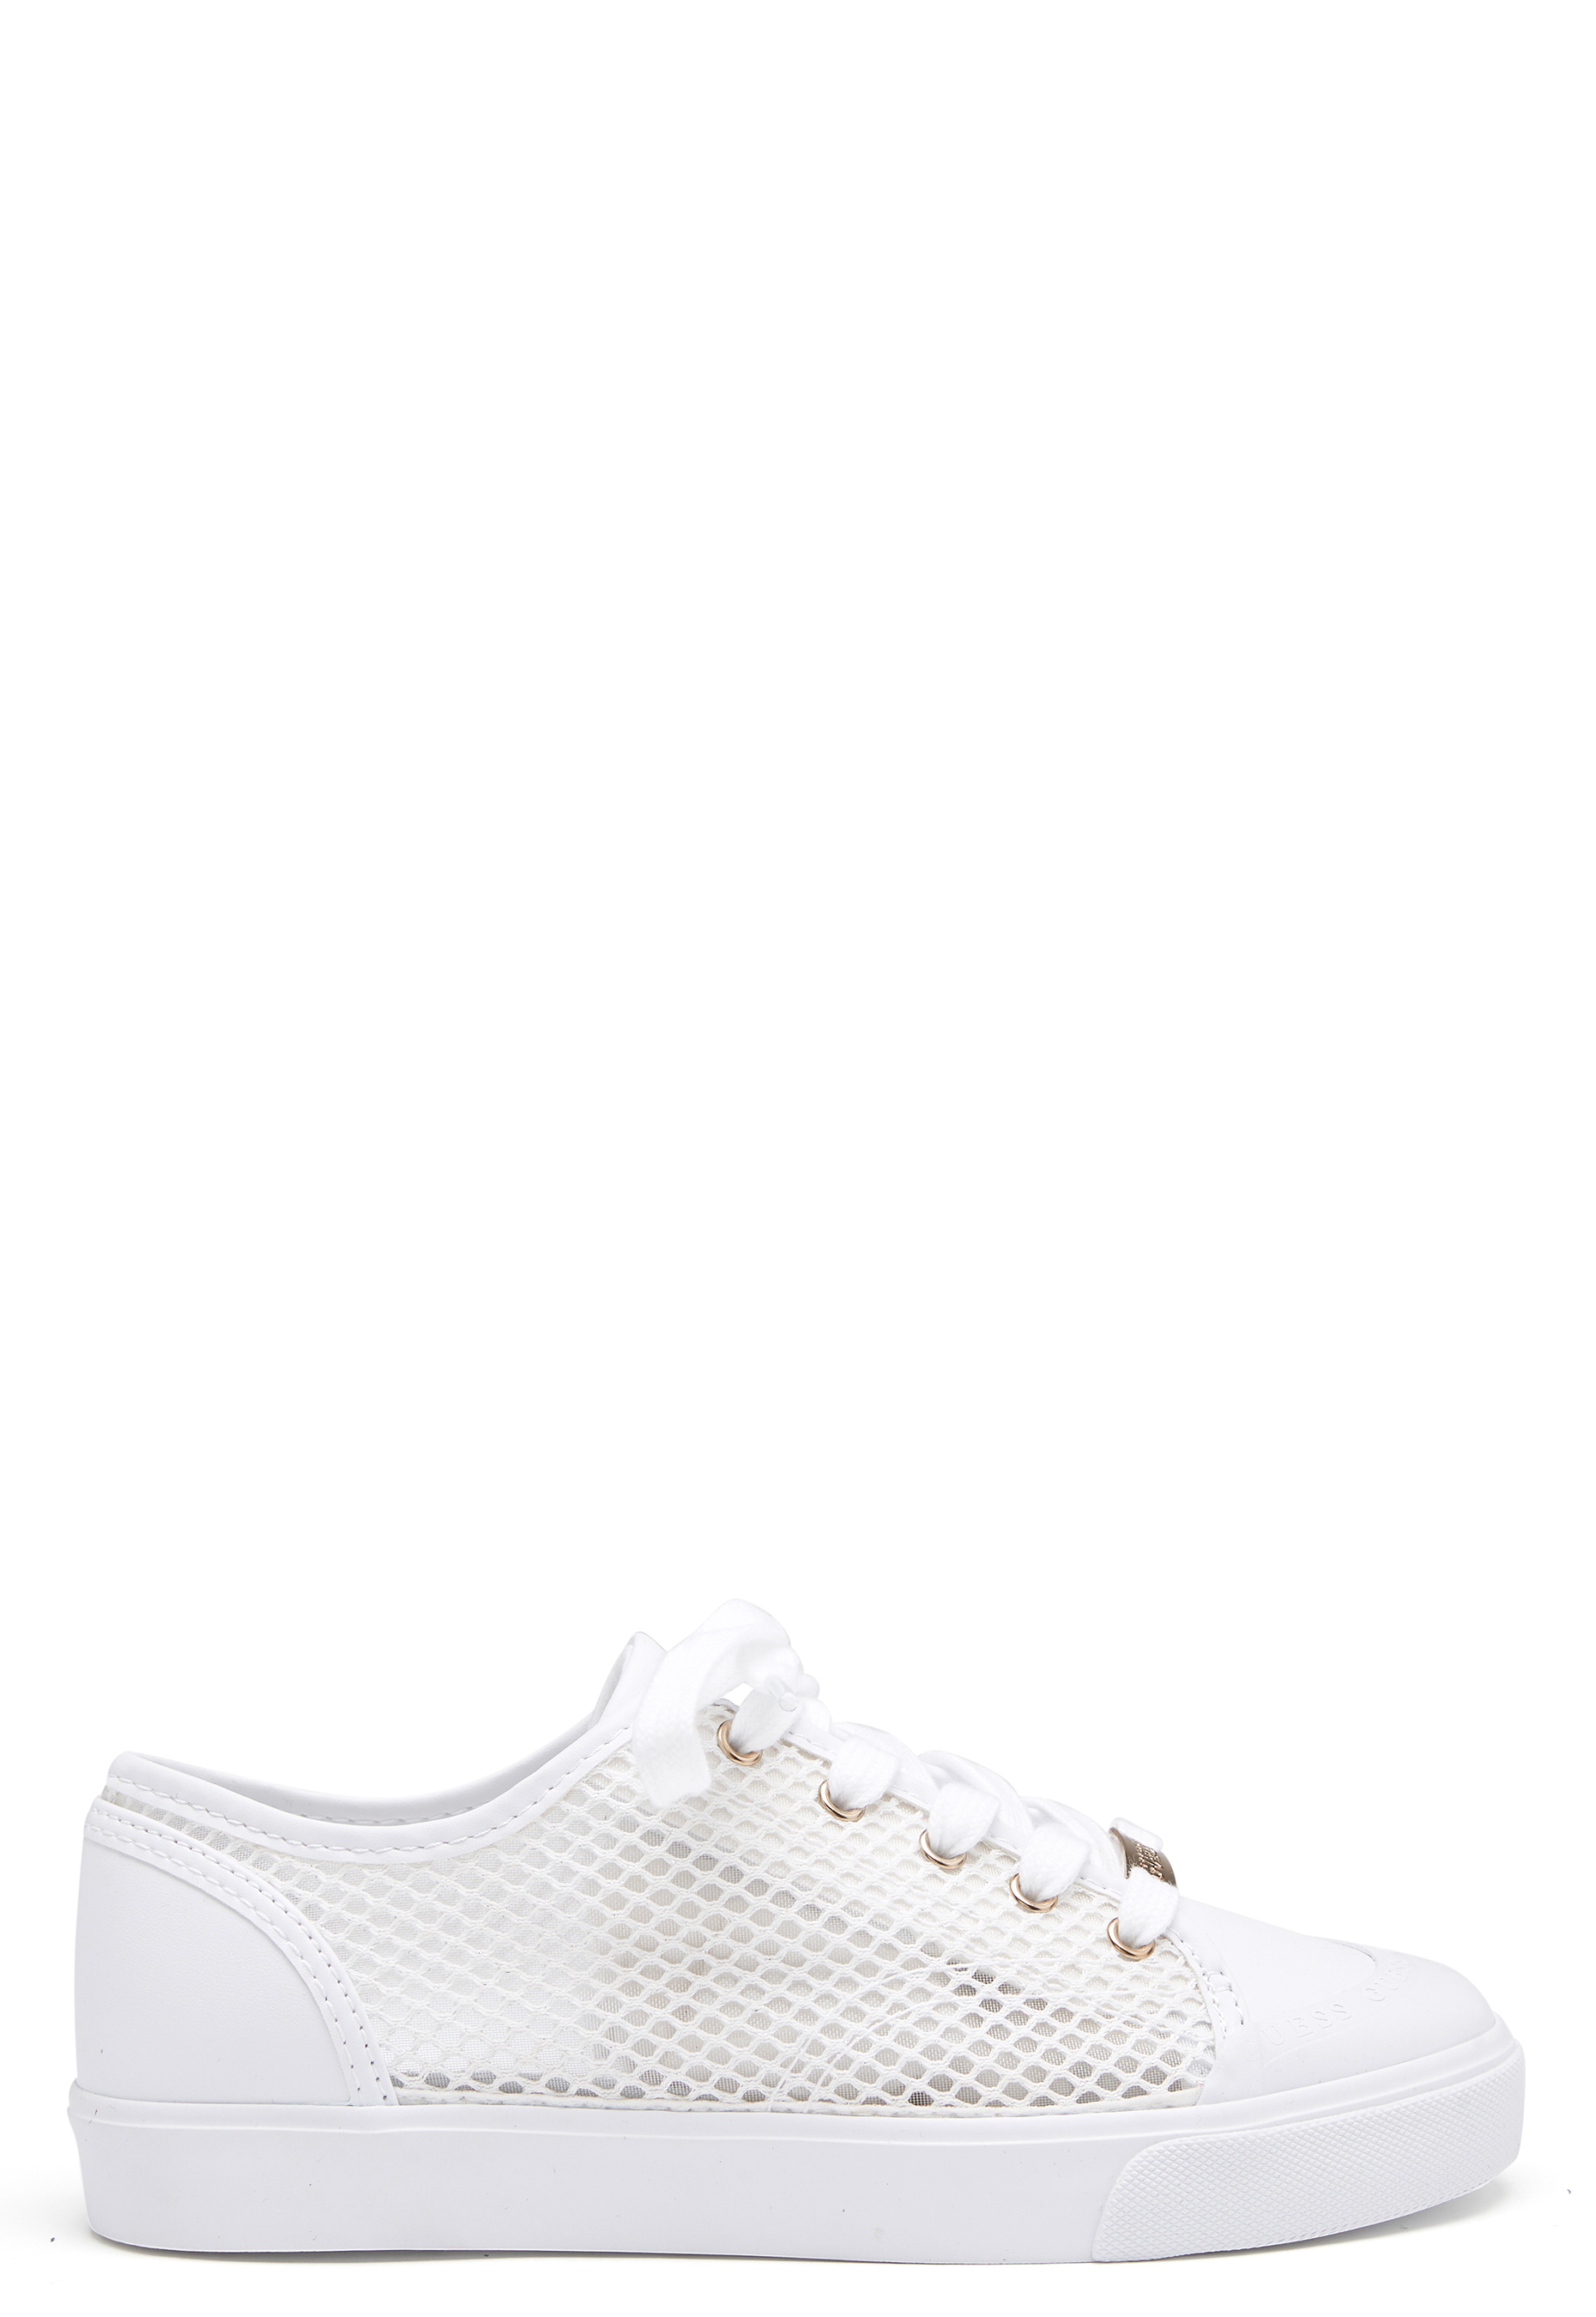 guess white and gold trainers